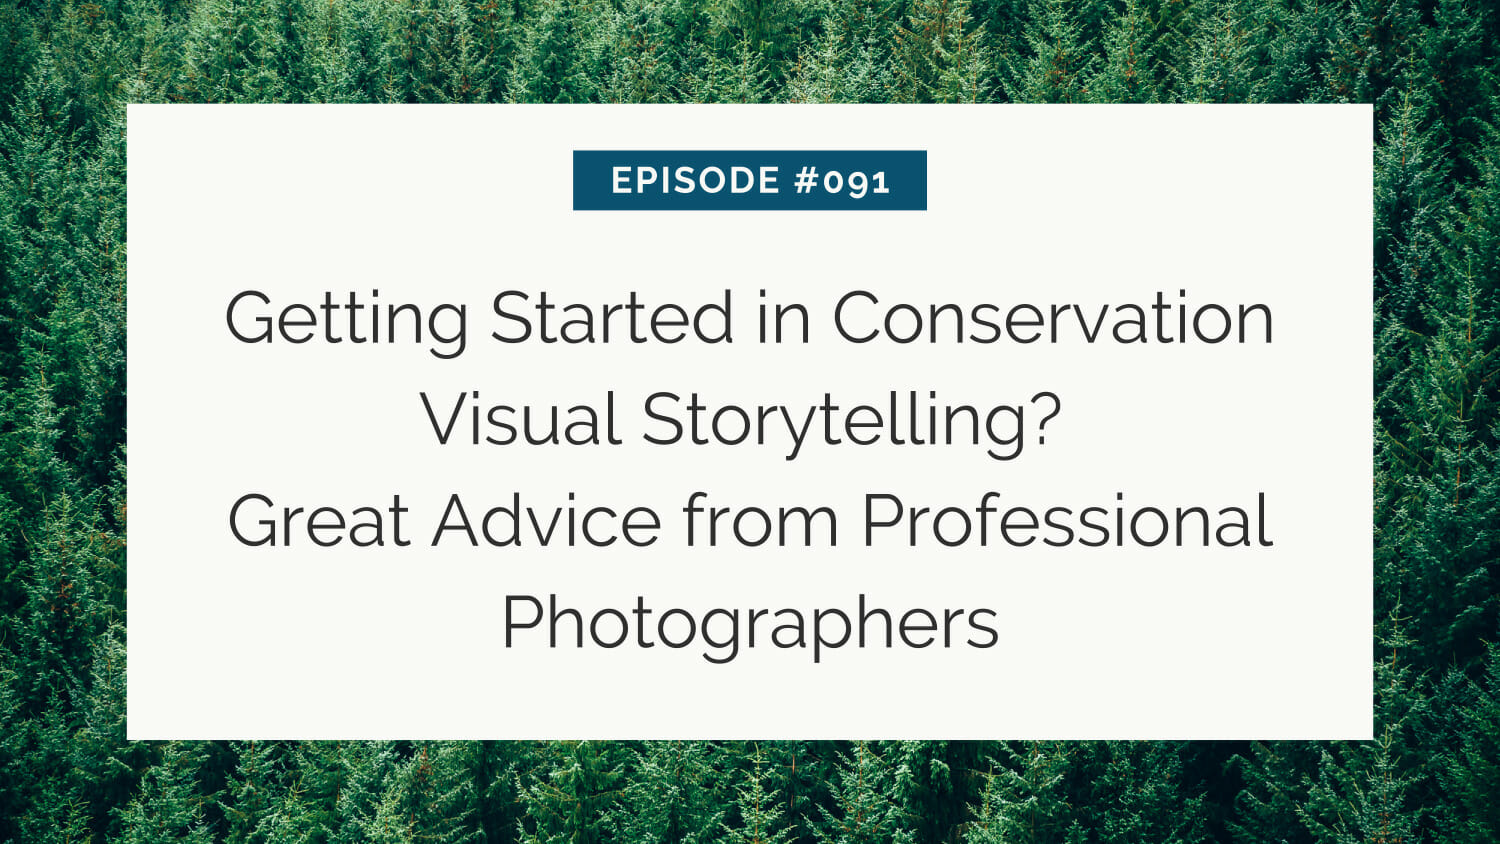 Aerial view of a dense forest with overlay text about an episode on conservation visual storytelling advice from professional photographers.